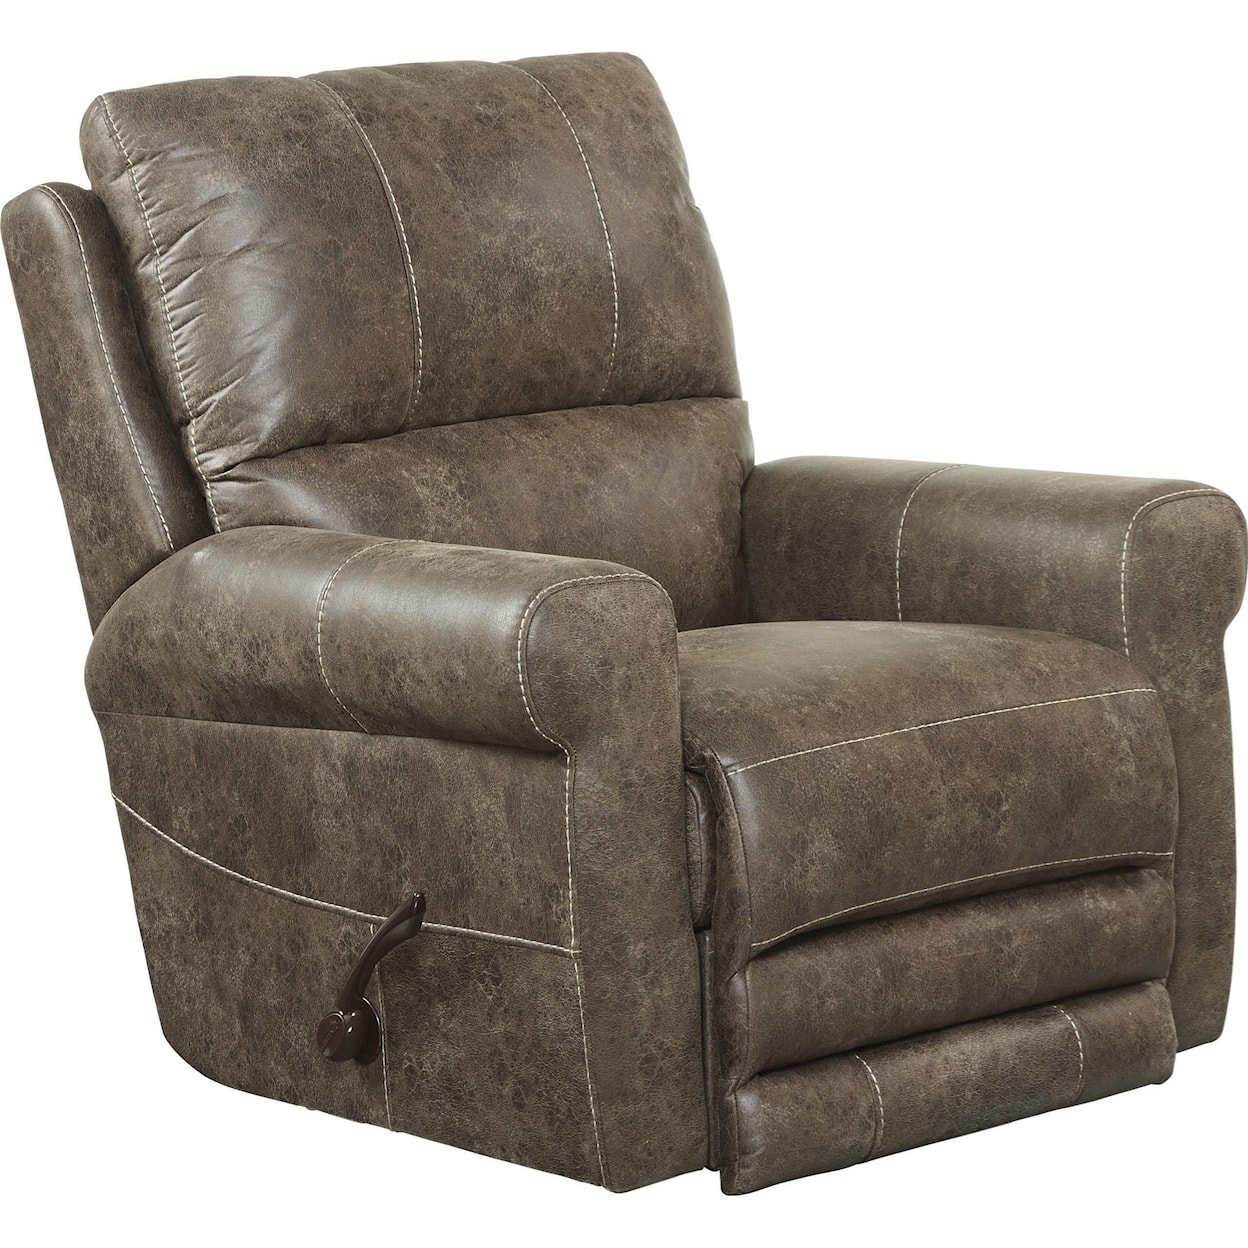 Catnapper 4753 Maddie Power Wall Hugger Recliner with USB Port